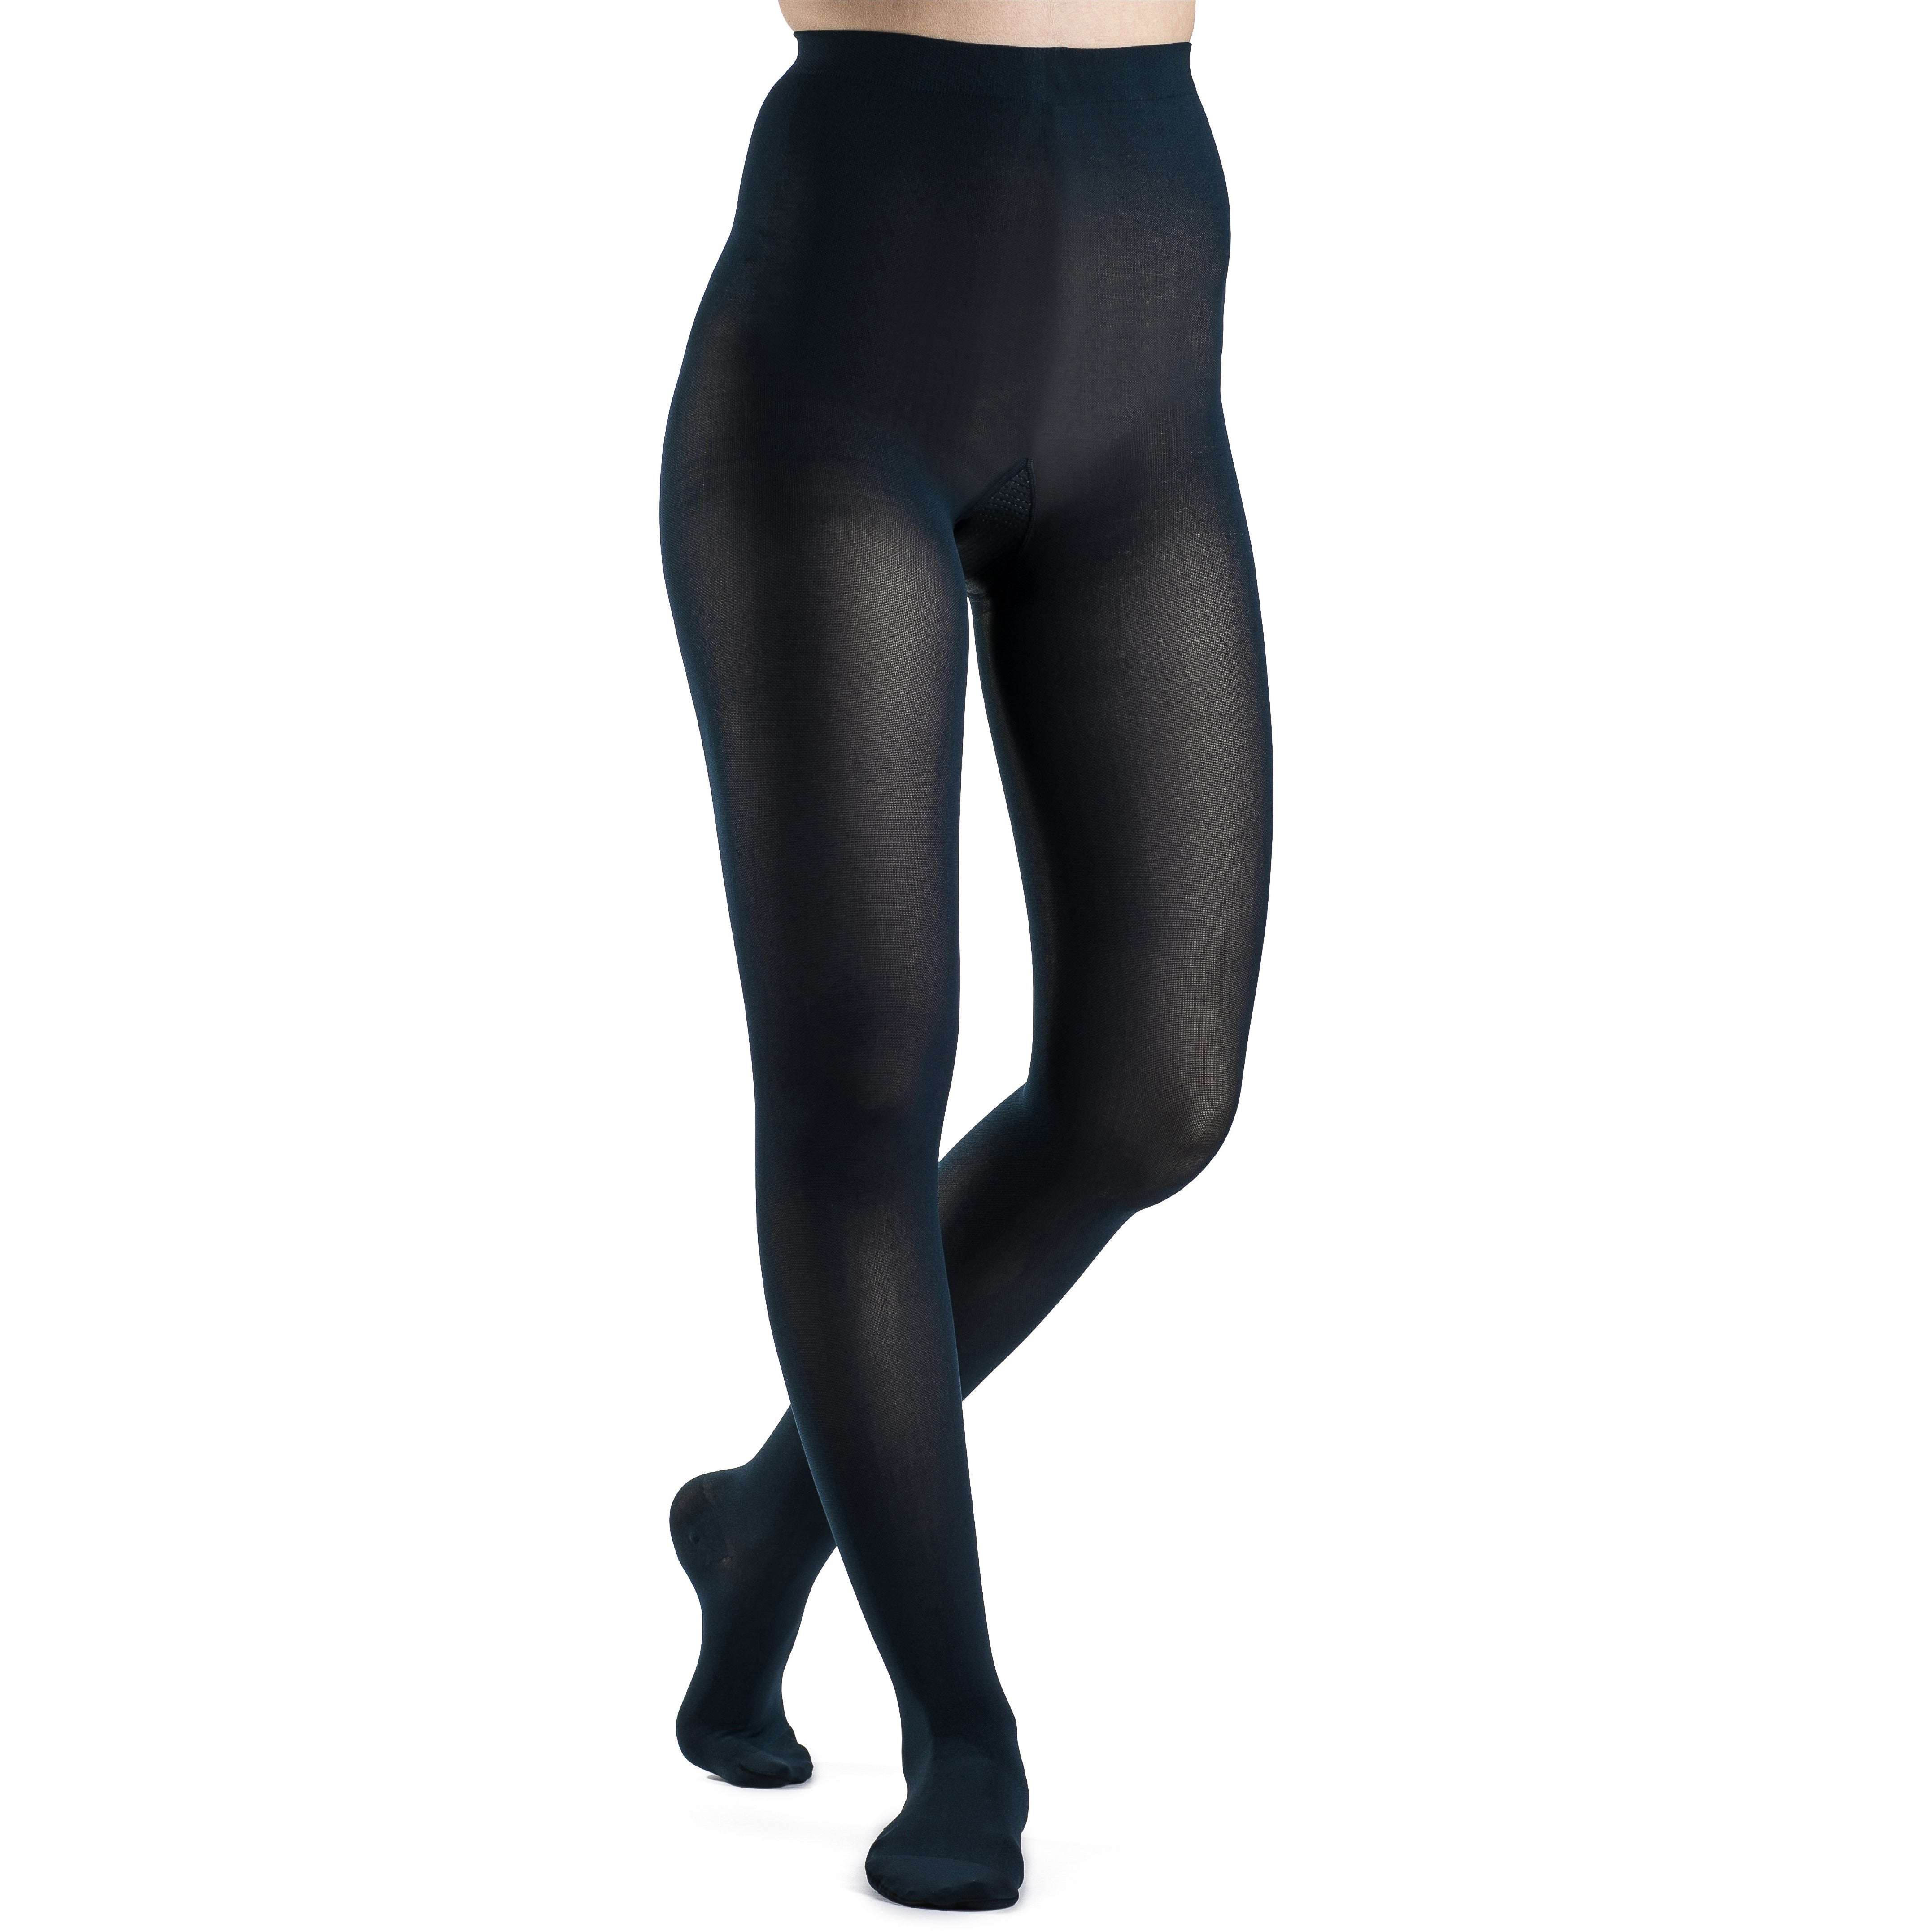 Navy Blue Footless Tights for Women Soft and Durable Color Tights